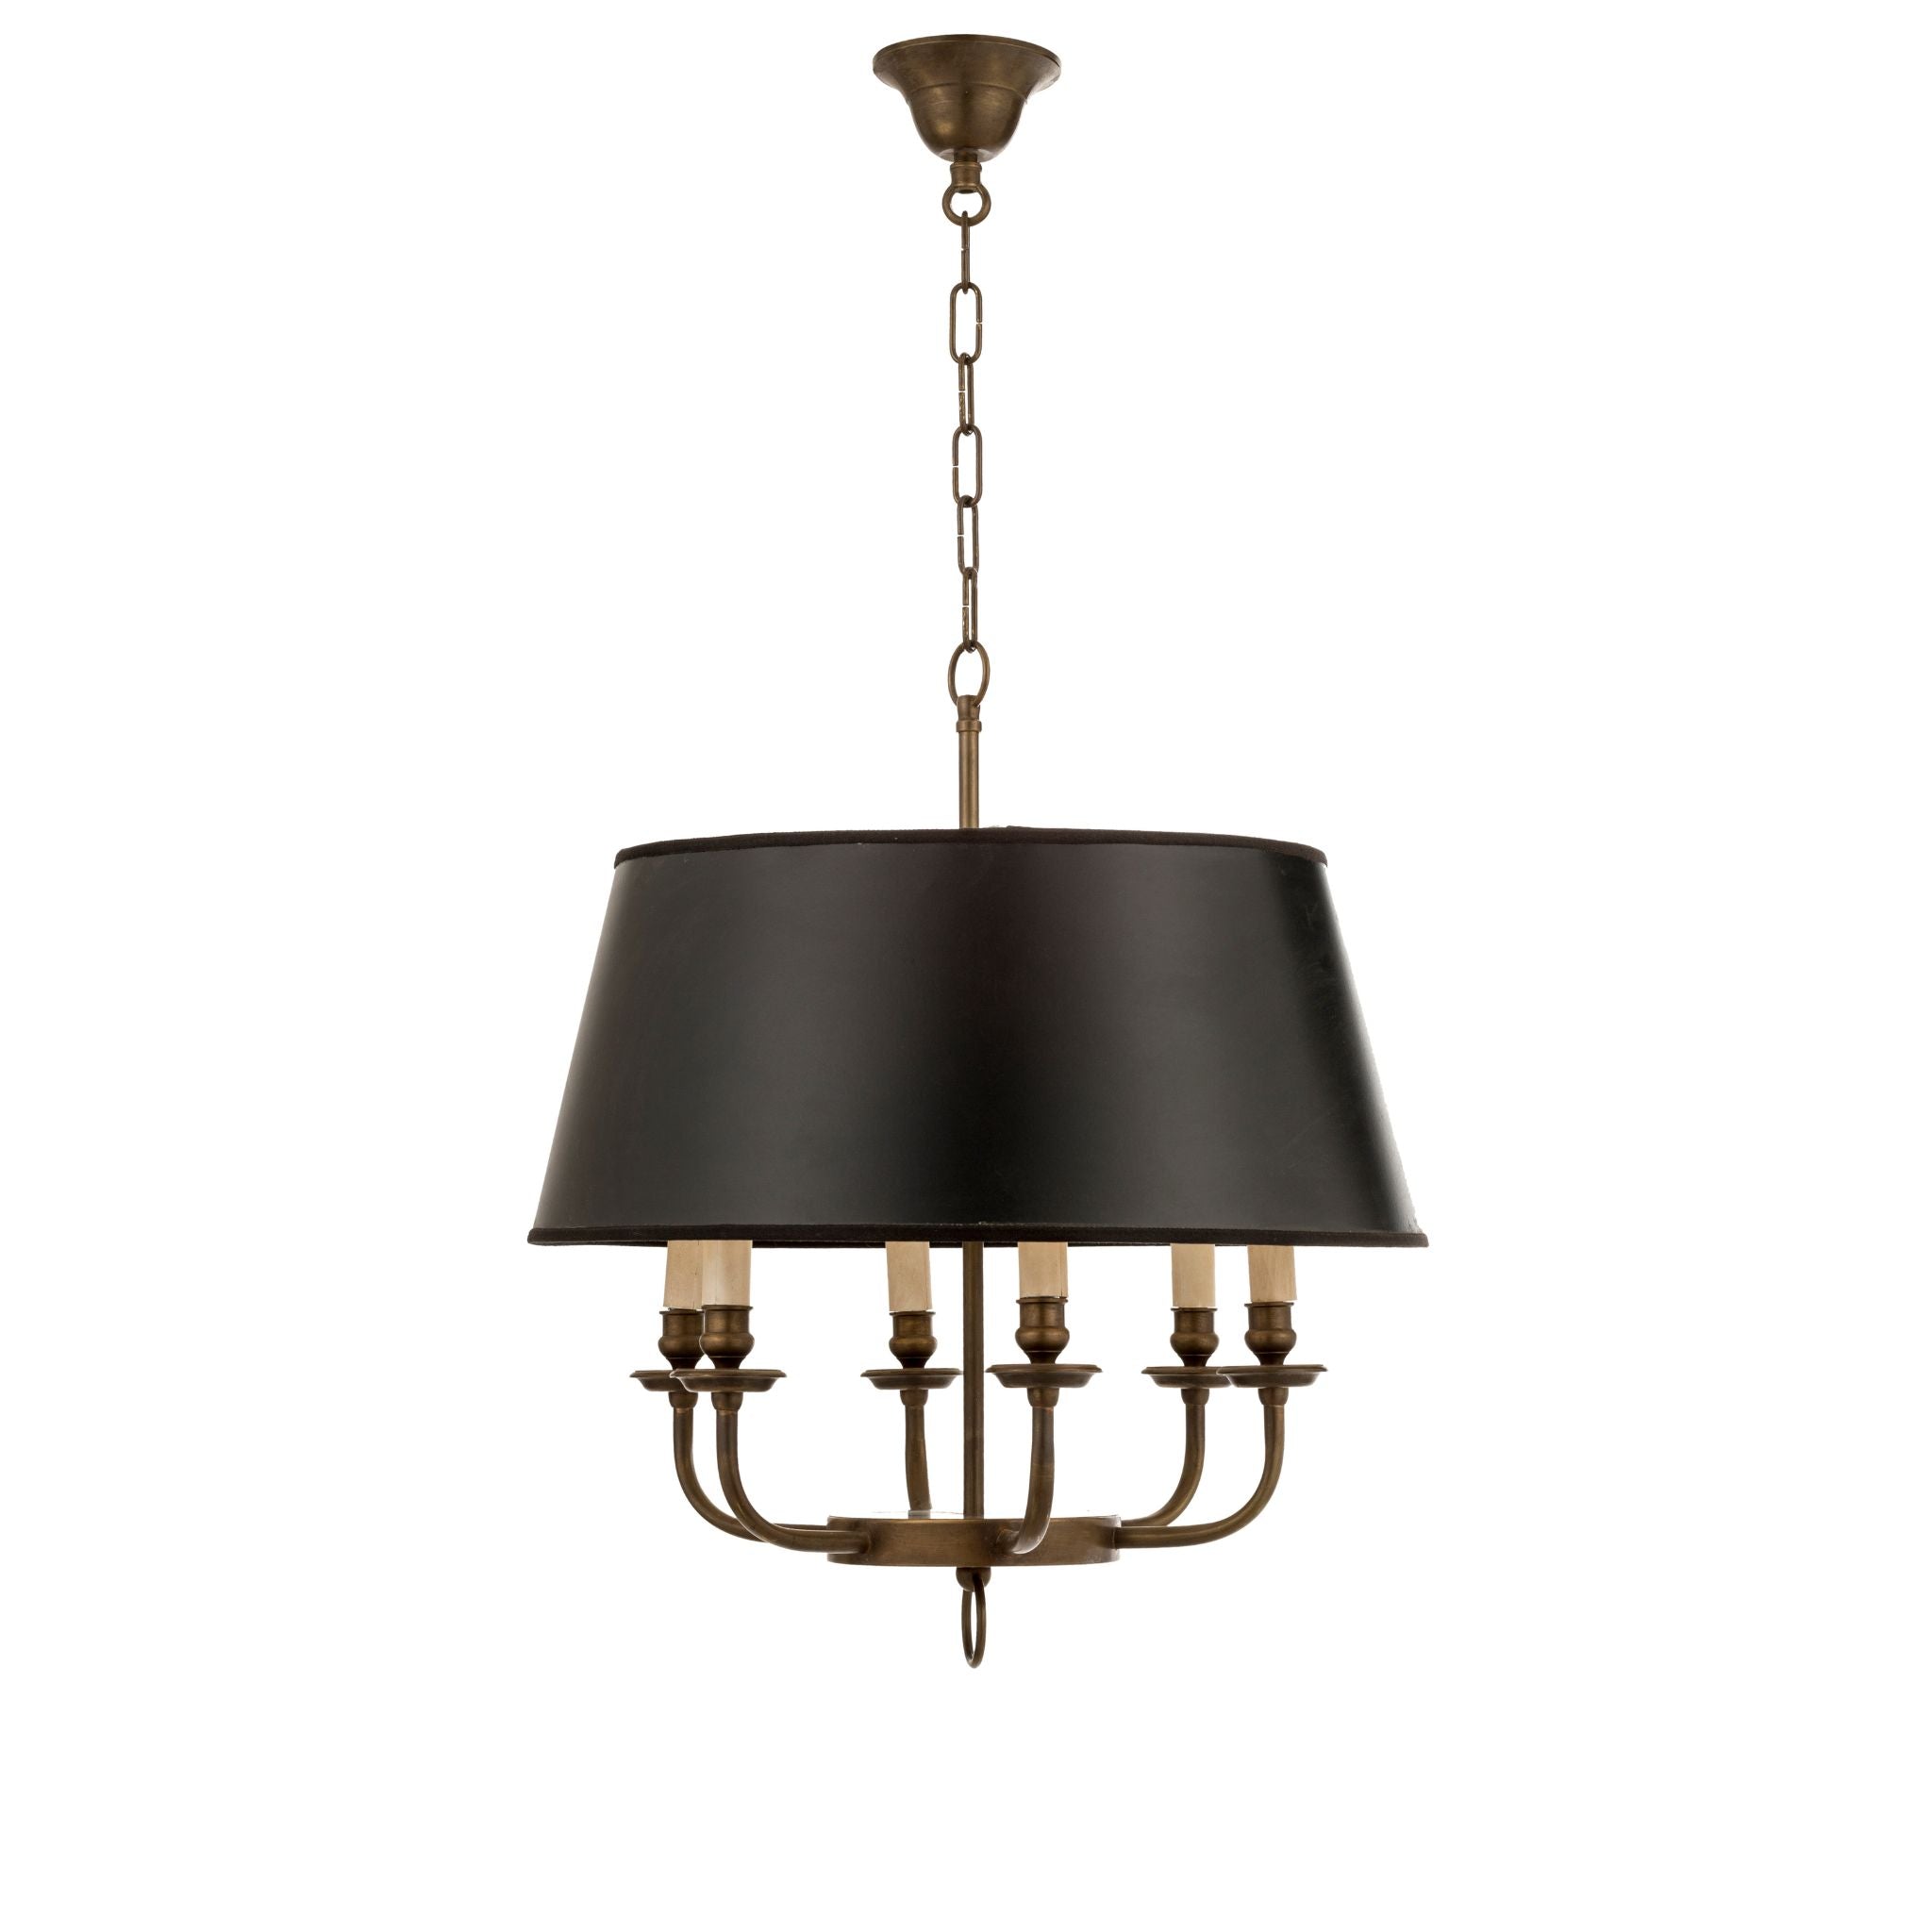 Novecento brass chandelier six lights with PVC lampshade - ilbronzetto